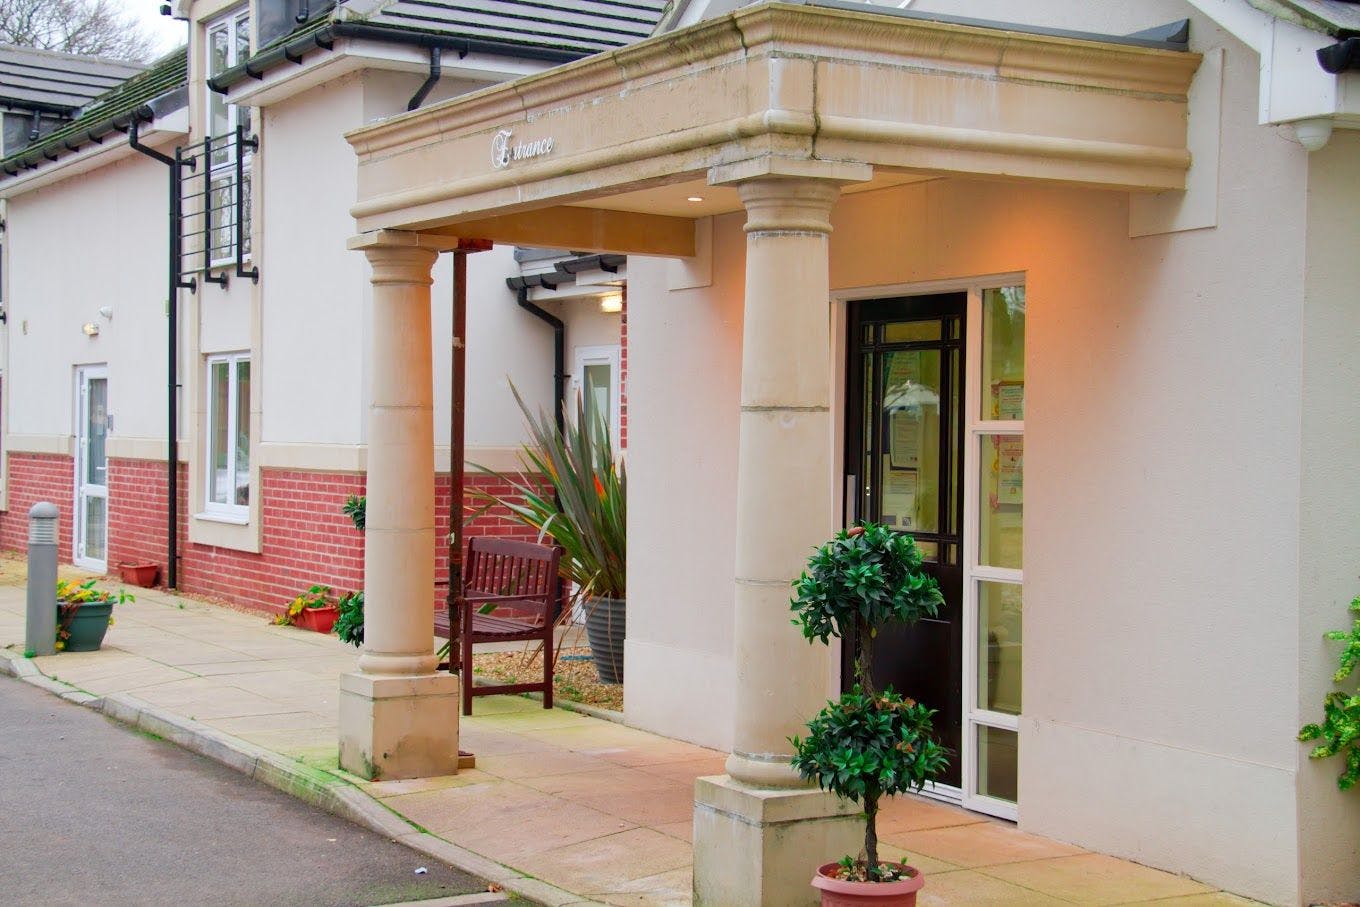 Exterior of Regency Manor Care Home in Poole, Dorset